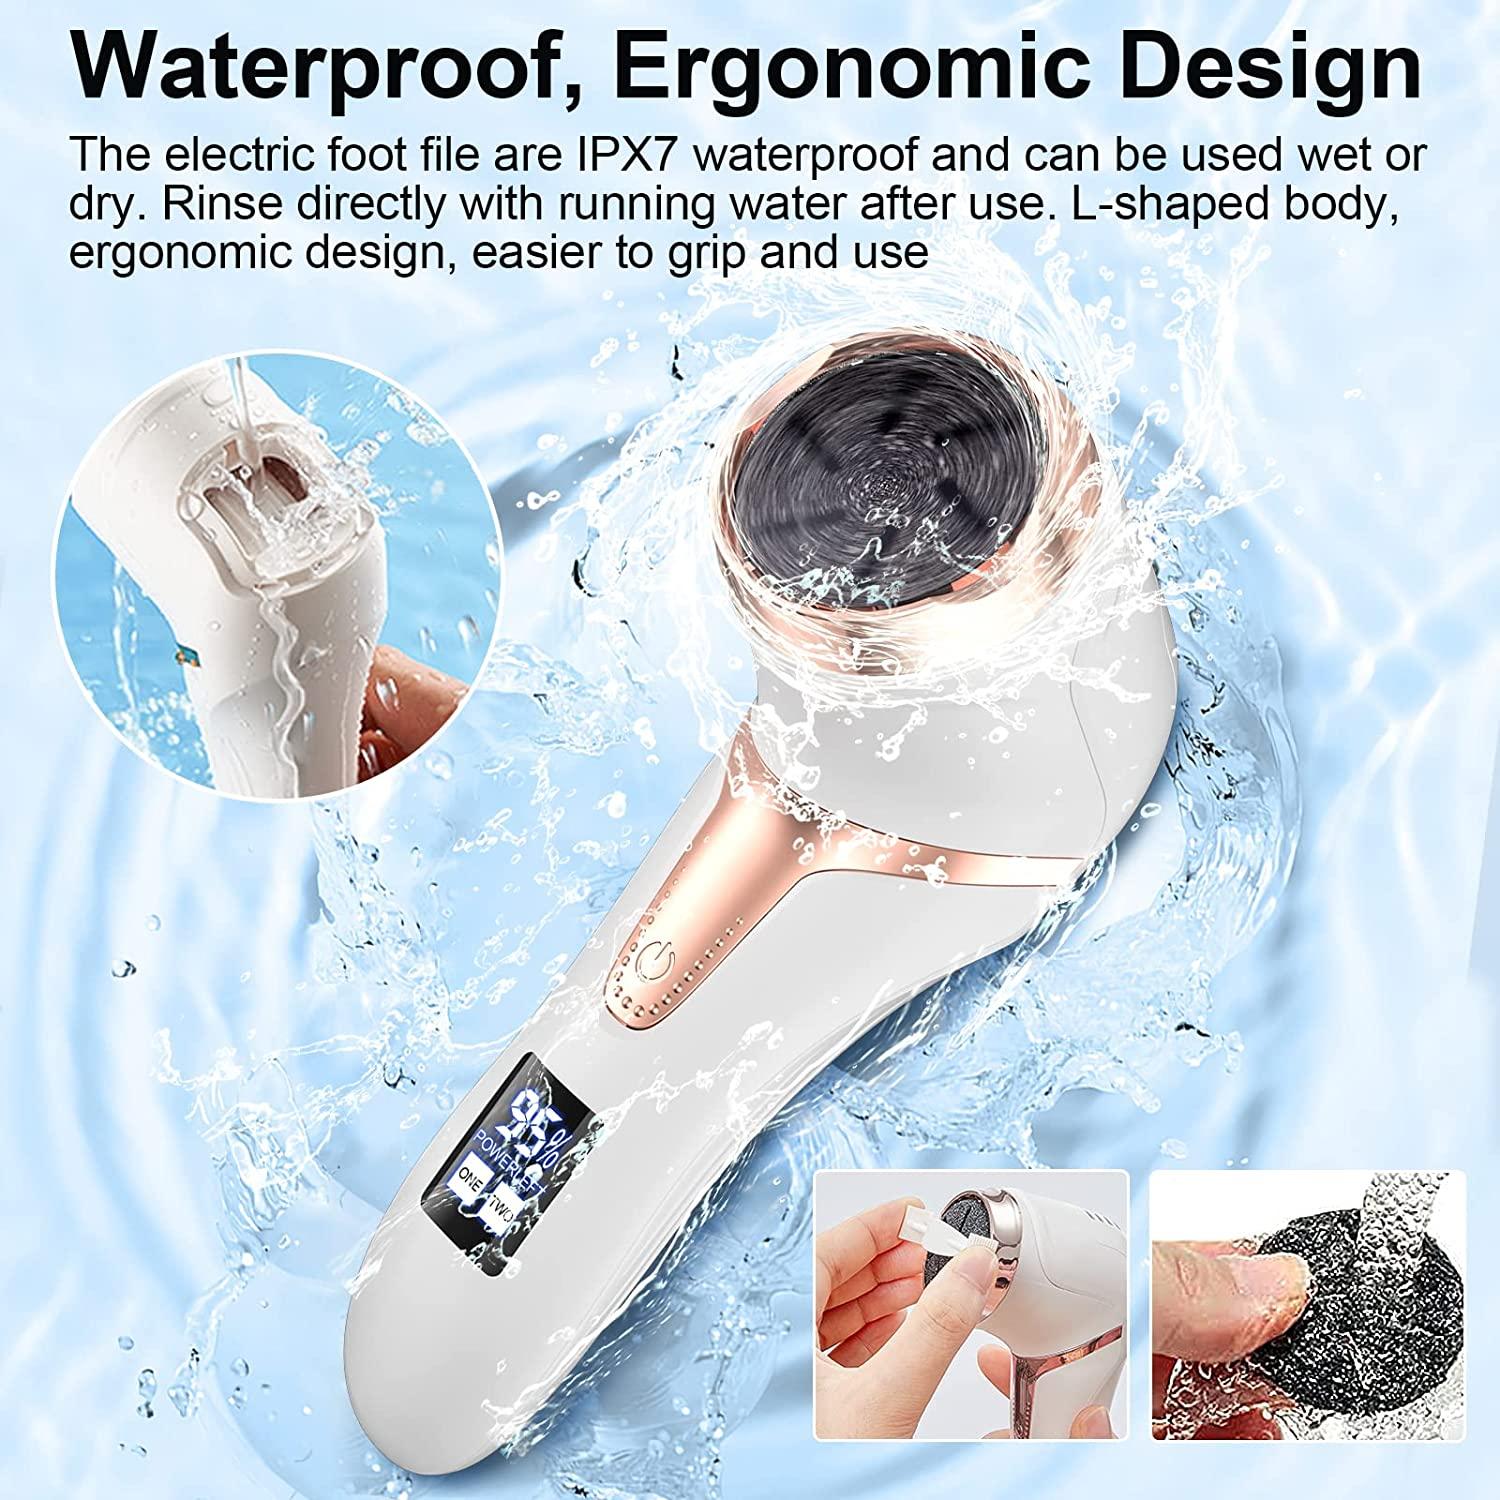 Electric Foot Callus Remover with Vacuum, Rechargeable Foot File